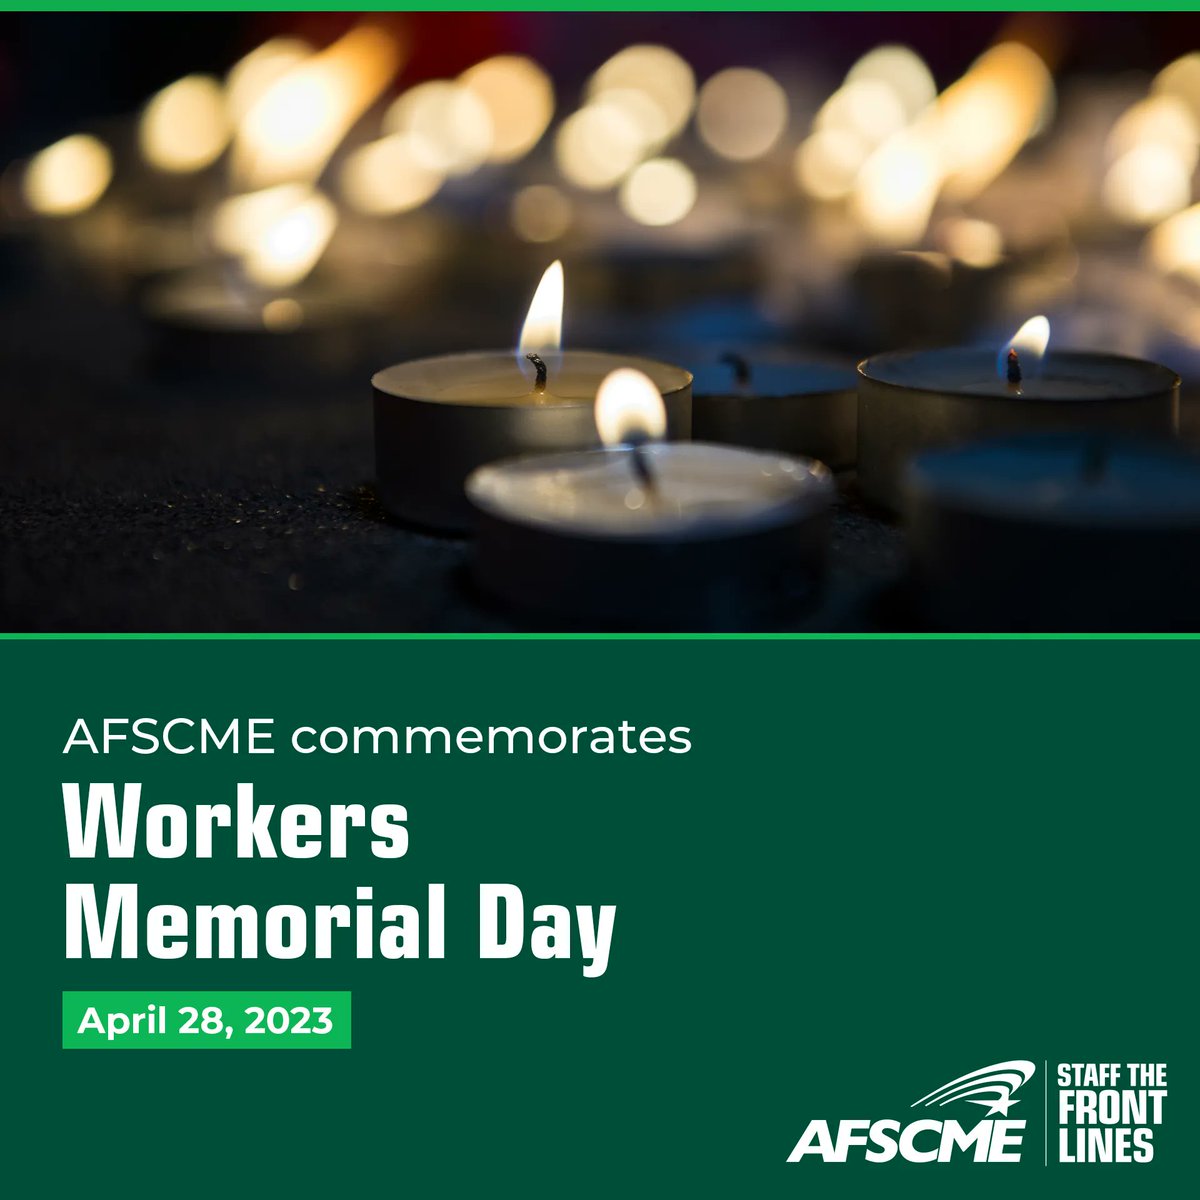 Today, we pause to remember those who were killed on the job. No one should lose their life or suffer injury or illness while providing for themselves and their families. Let this #WorkersMemorialDay serve as a reminder of why we must organize. afsc.me/3LCW7yW